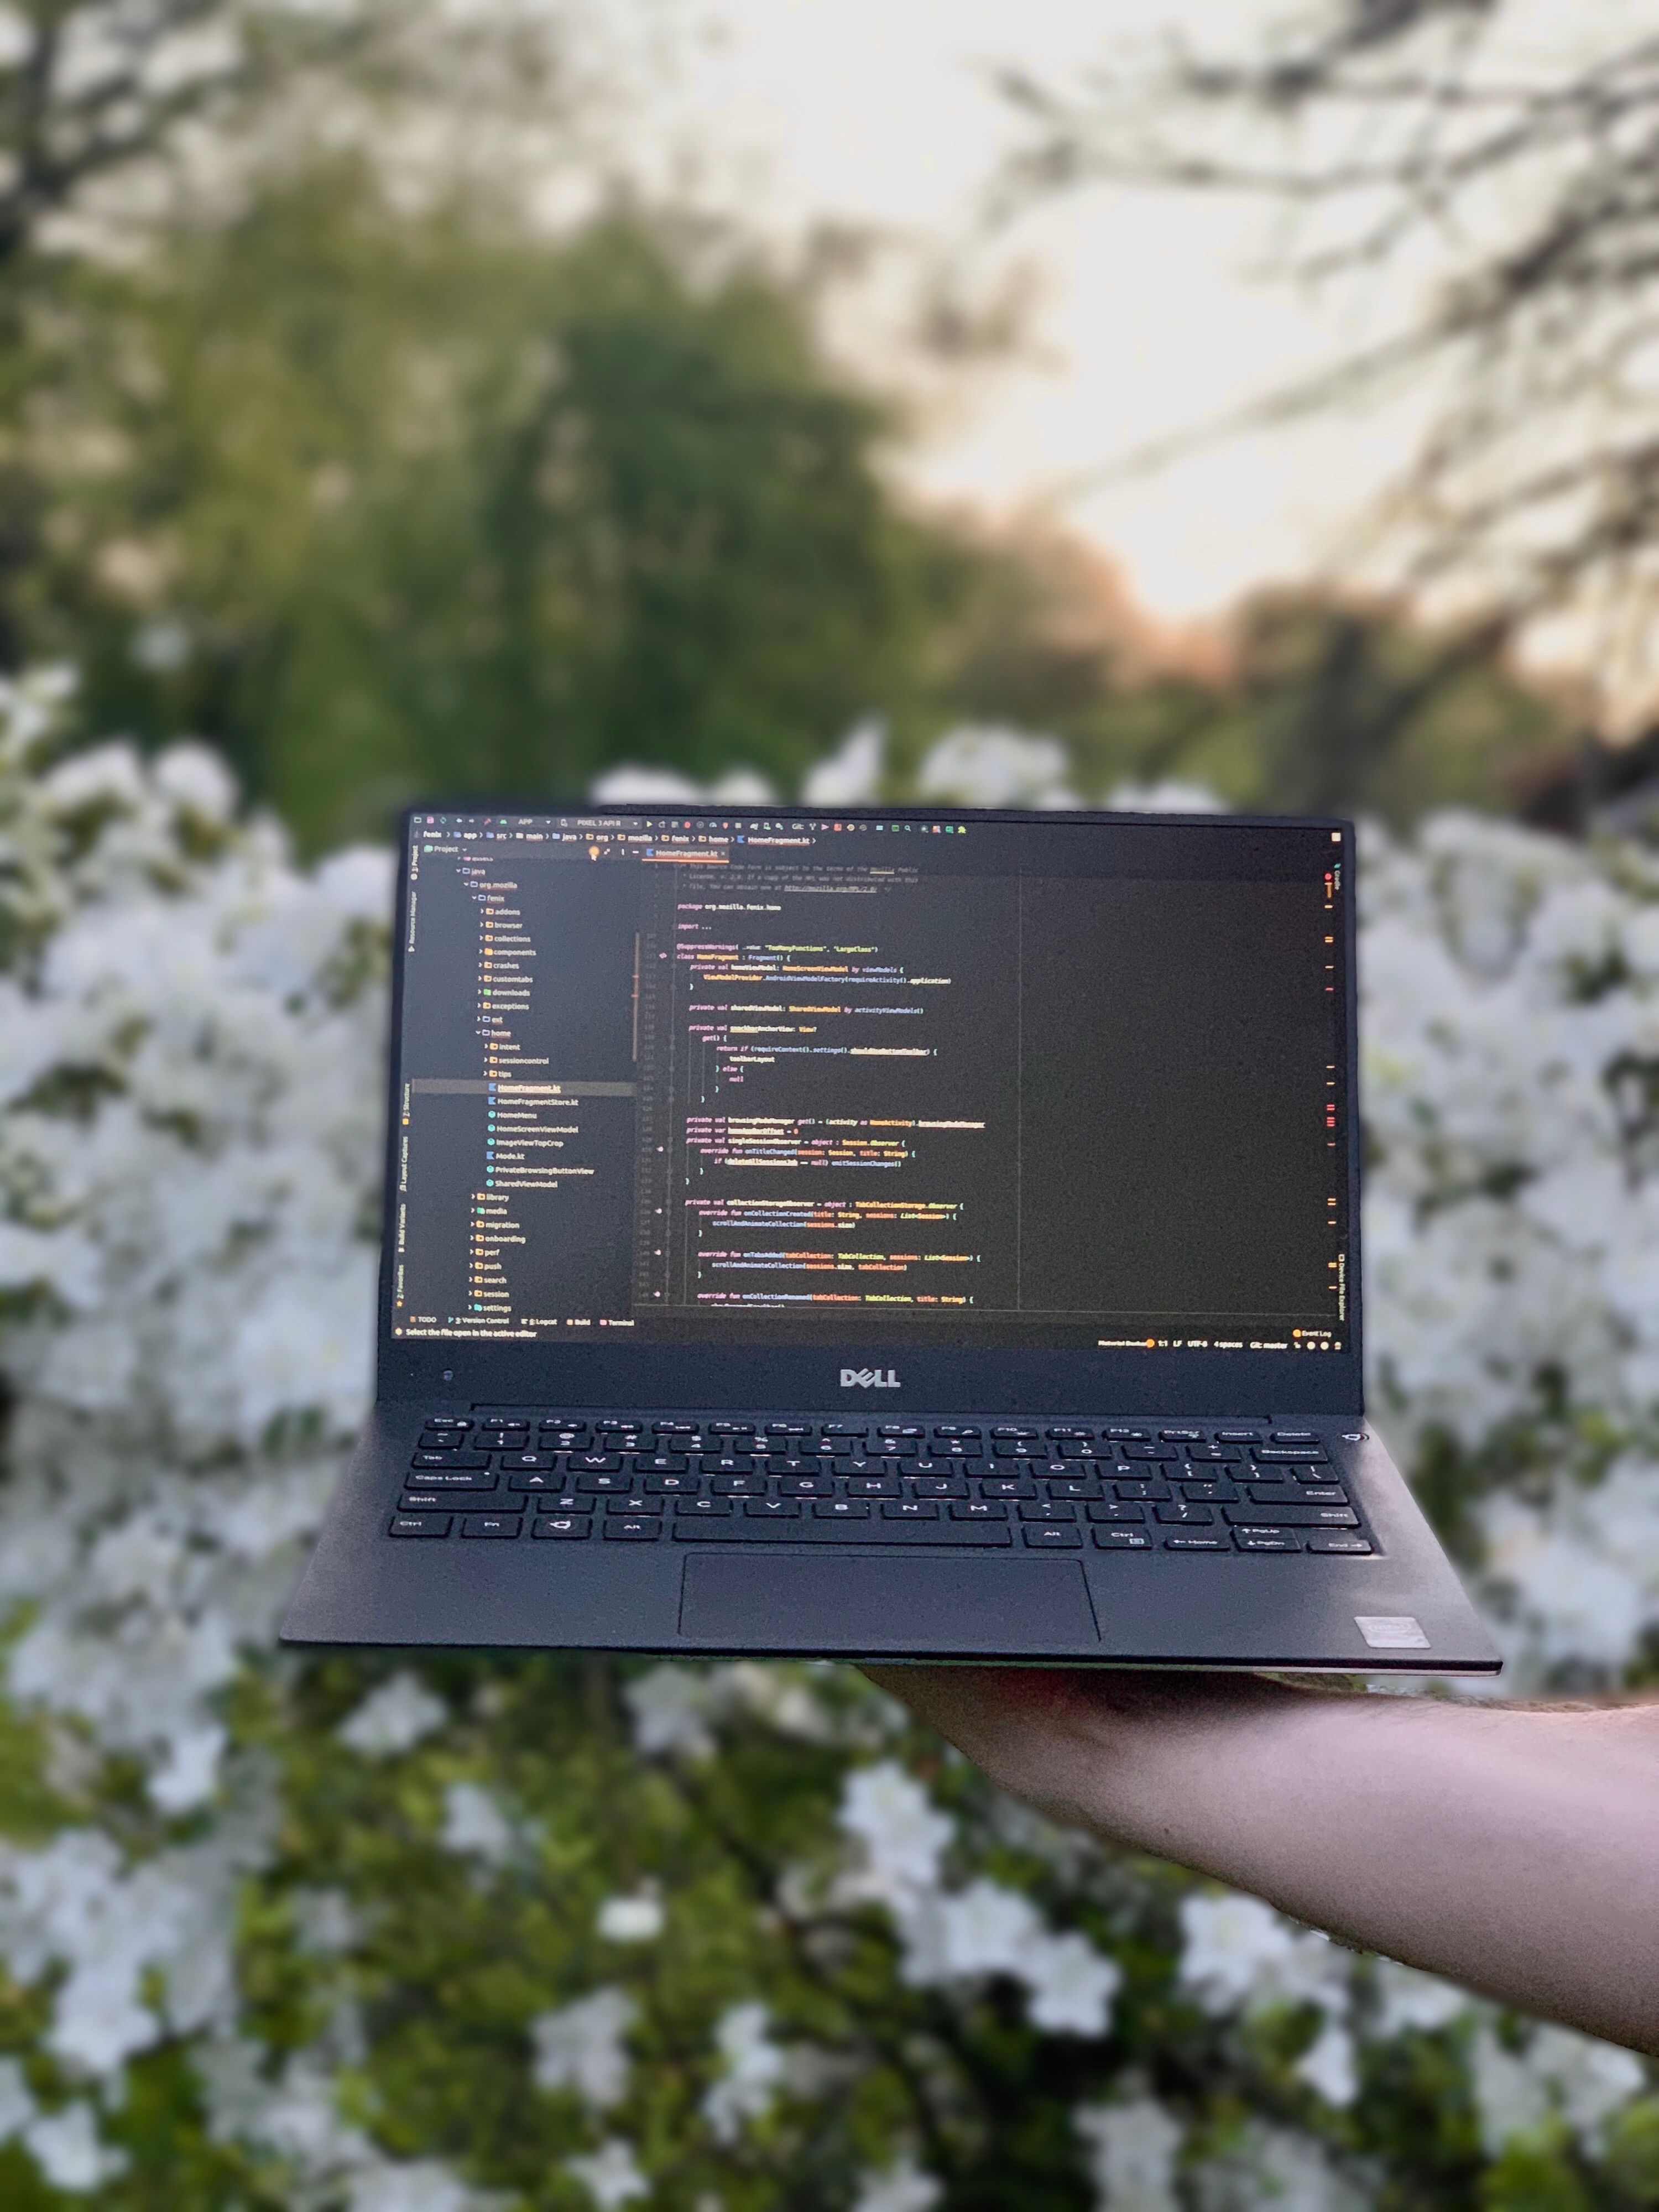 Holding up a laptop in front of white flowers. The laptop is displaying kotlin code from the Firefox Fenix peoject.